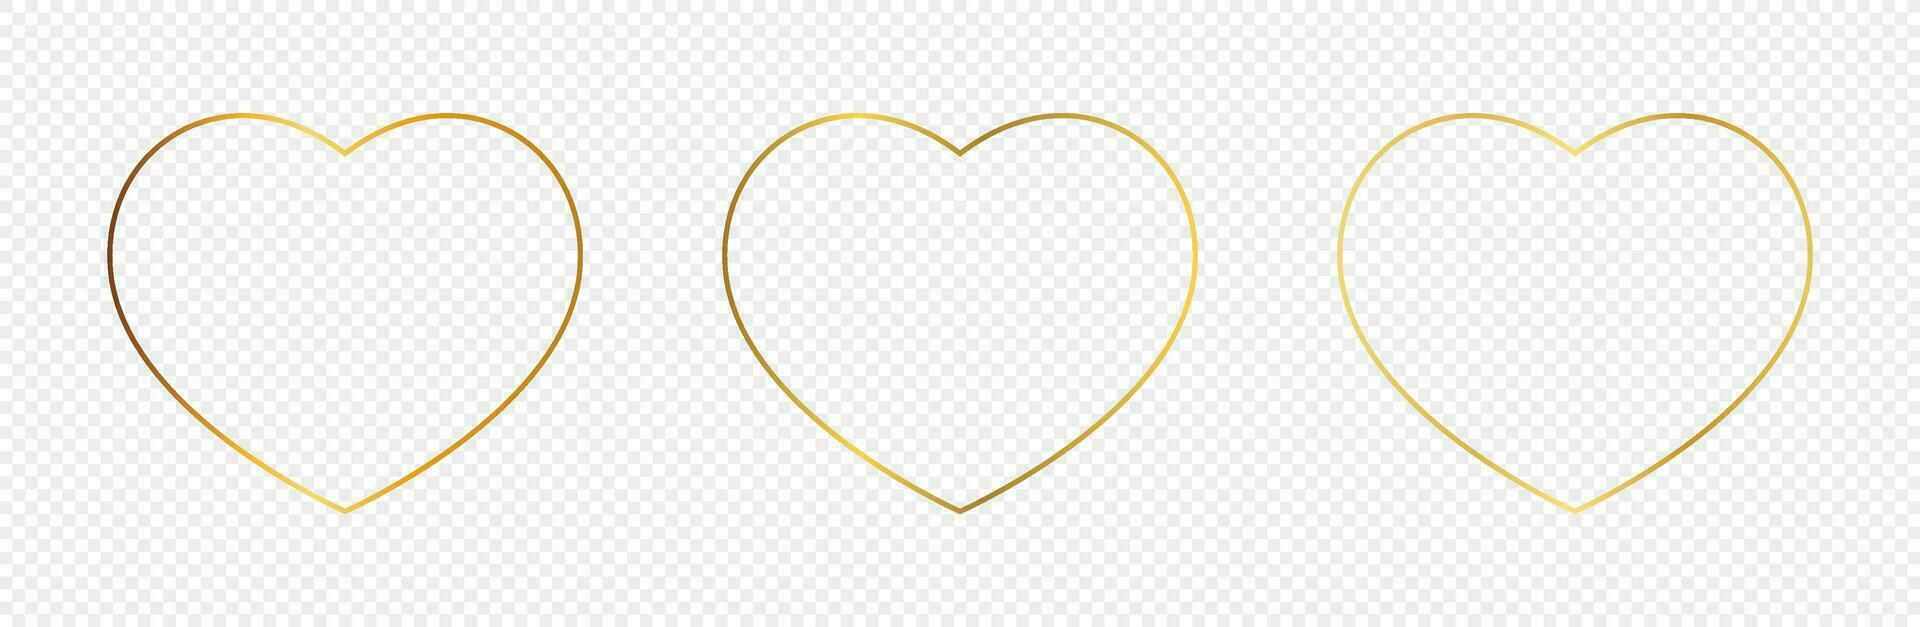 Set of three gold glowing heart shapes isolated on background. Shiny frame with glowing effects. Vector illustration.